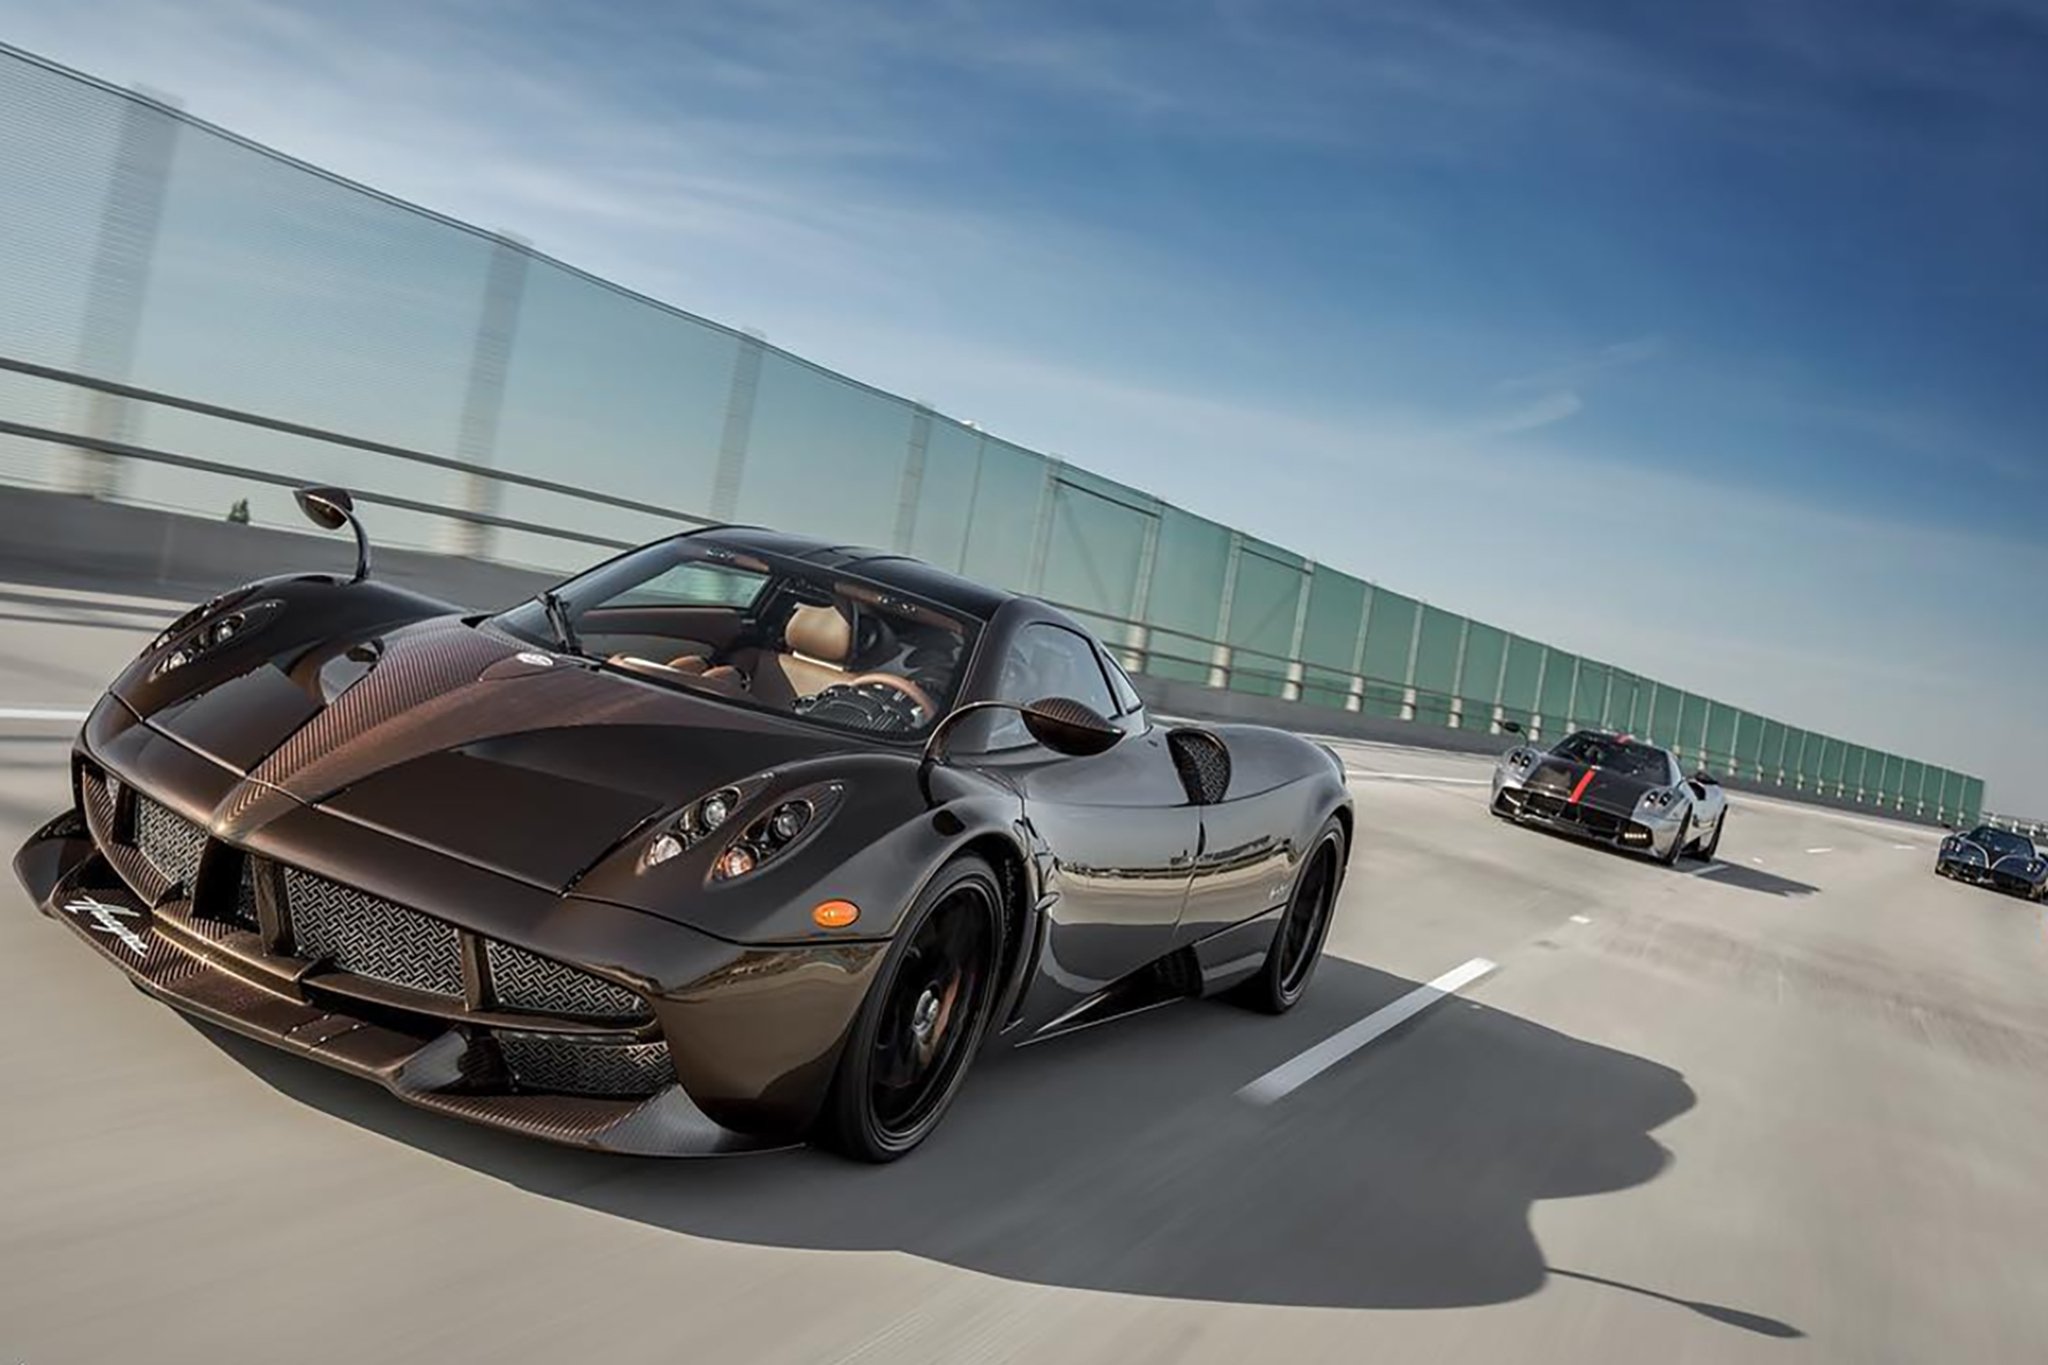 Posh and really fast - A one of its kind Pagani Huayra Hermes edition - Luxurylaunches